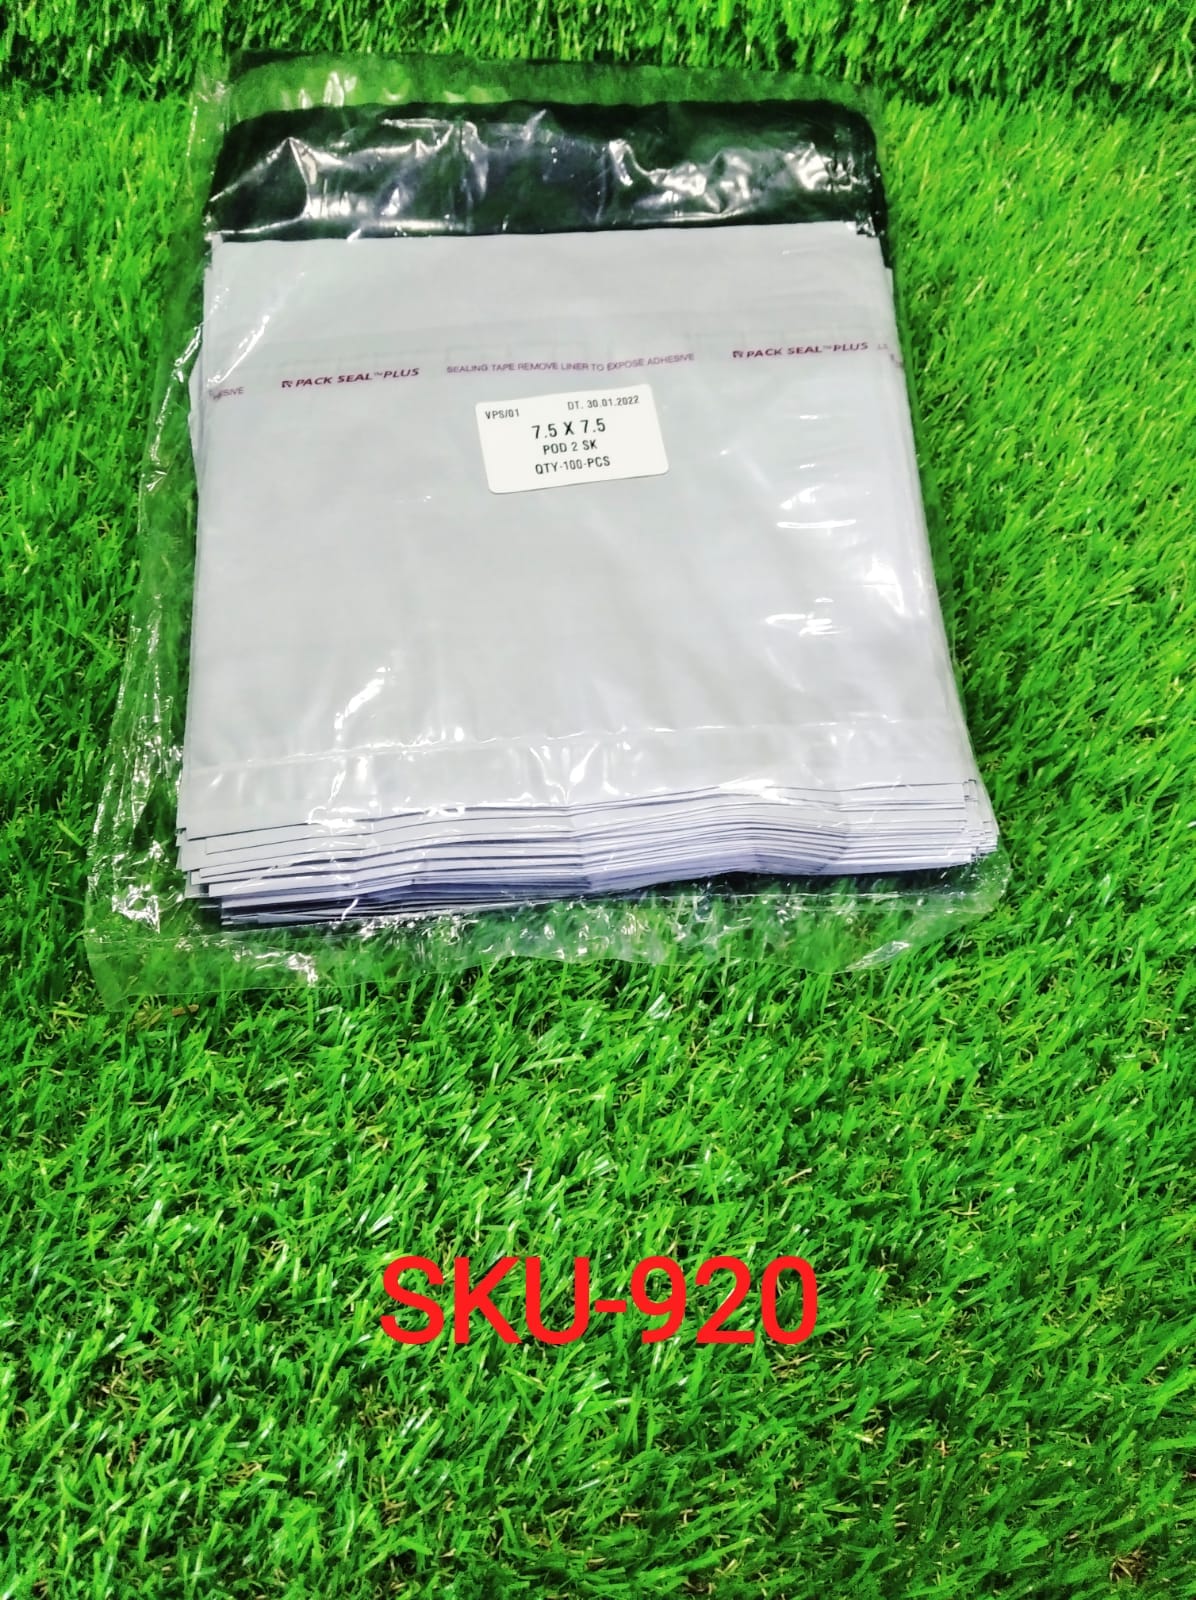 0920 Tamper Proof Courier Bags (7_5X7_5 inch) Pack of 100Pcs freeshipping - DeoDap